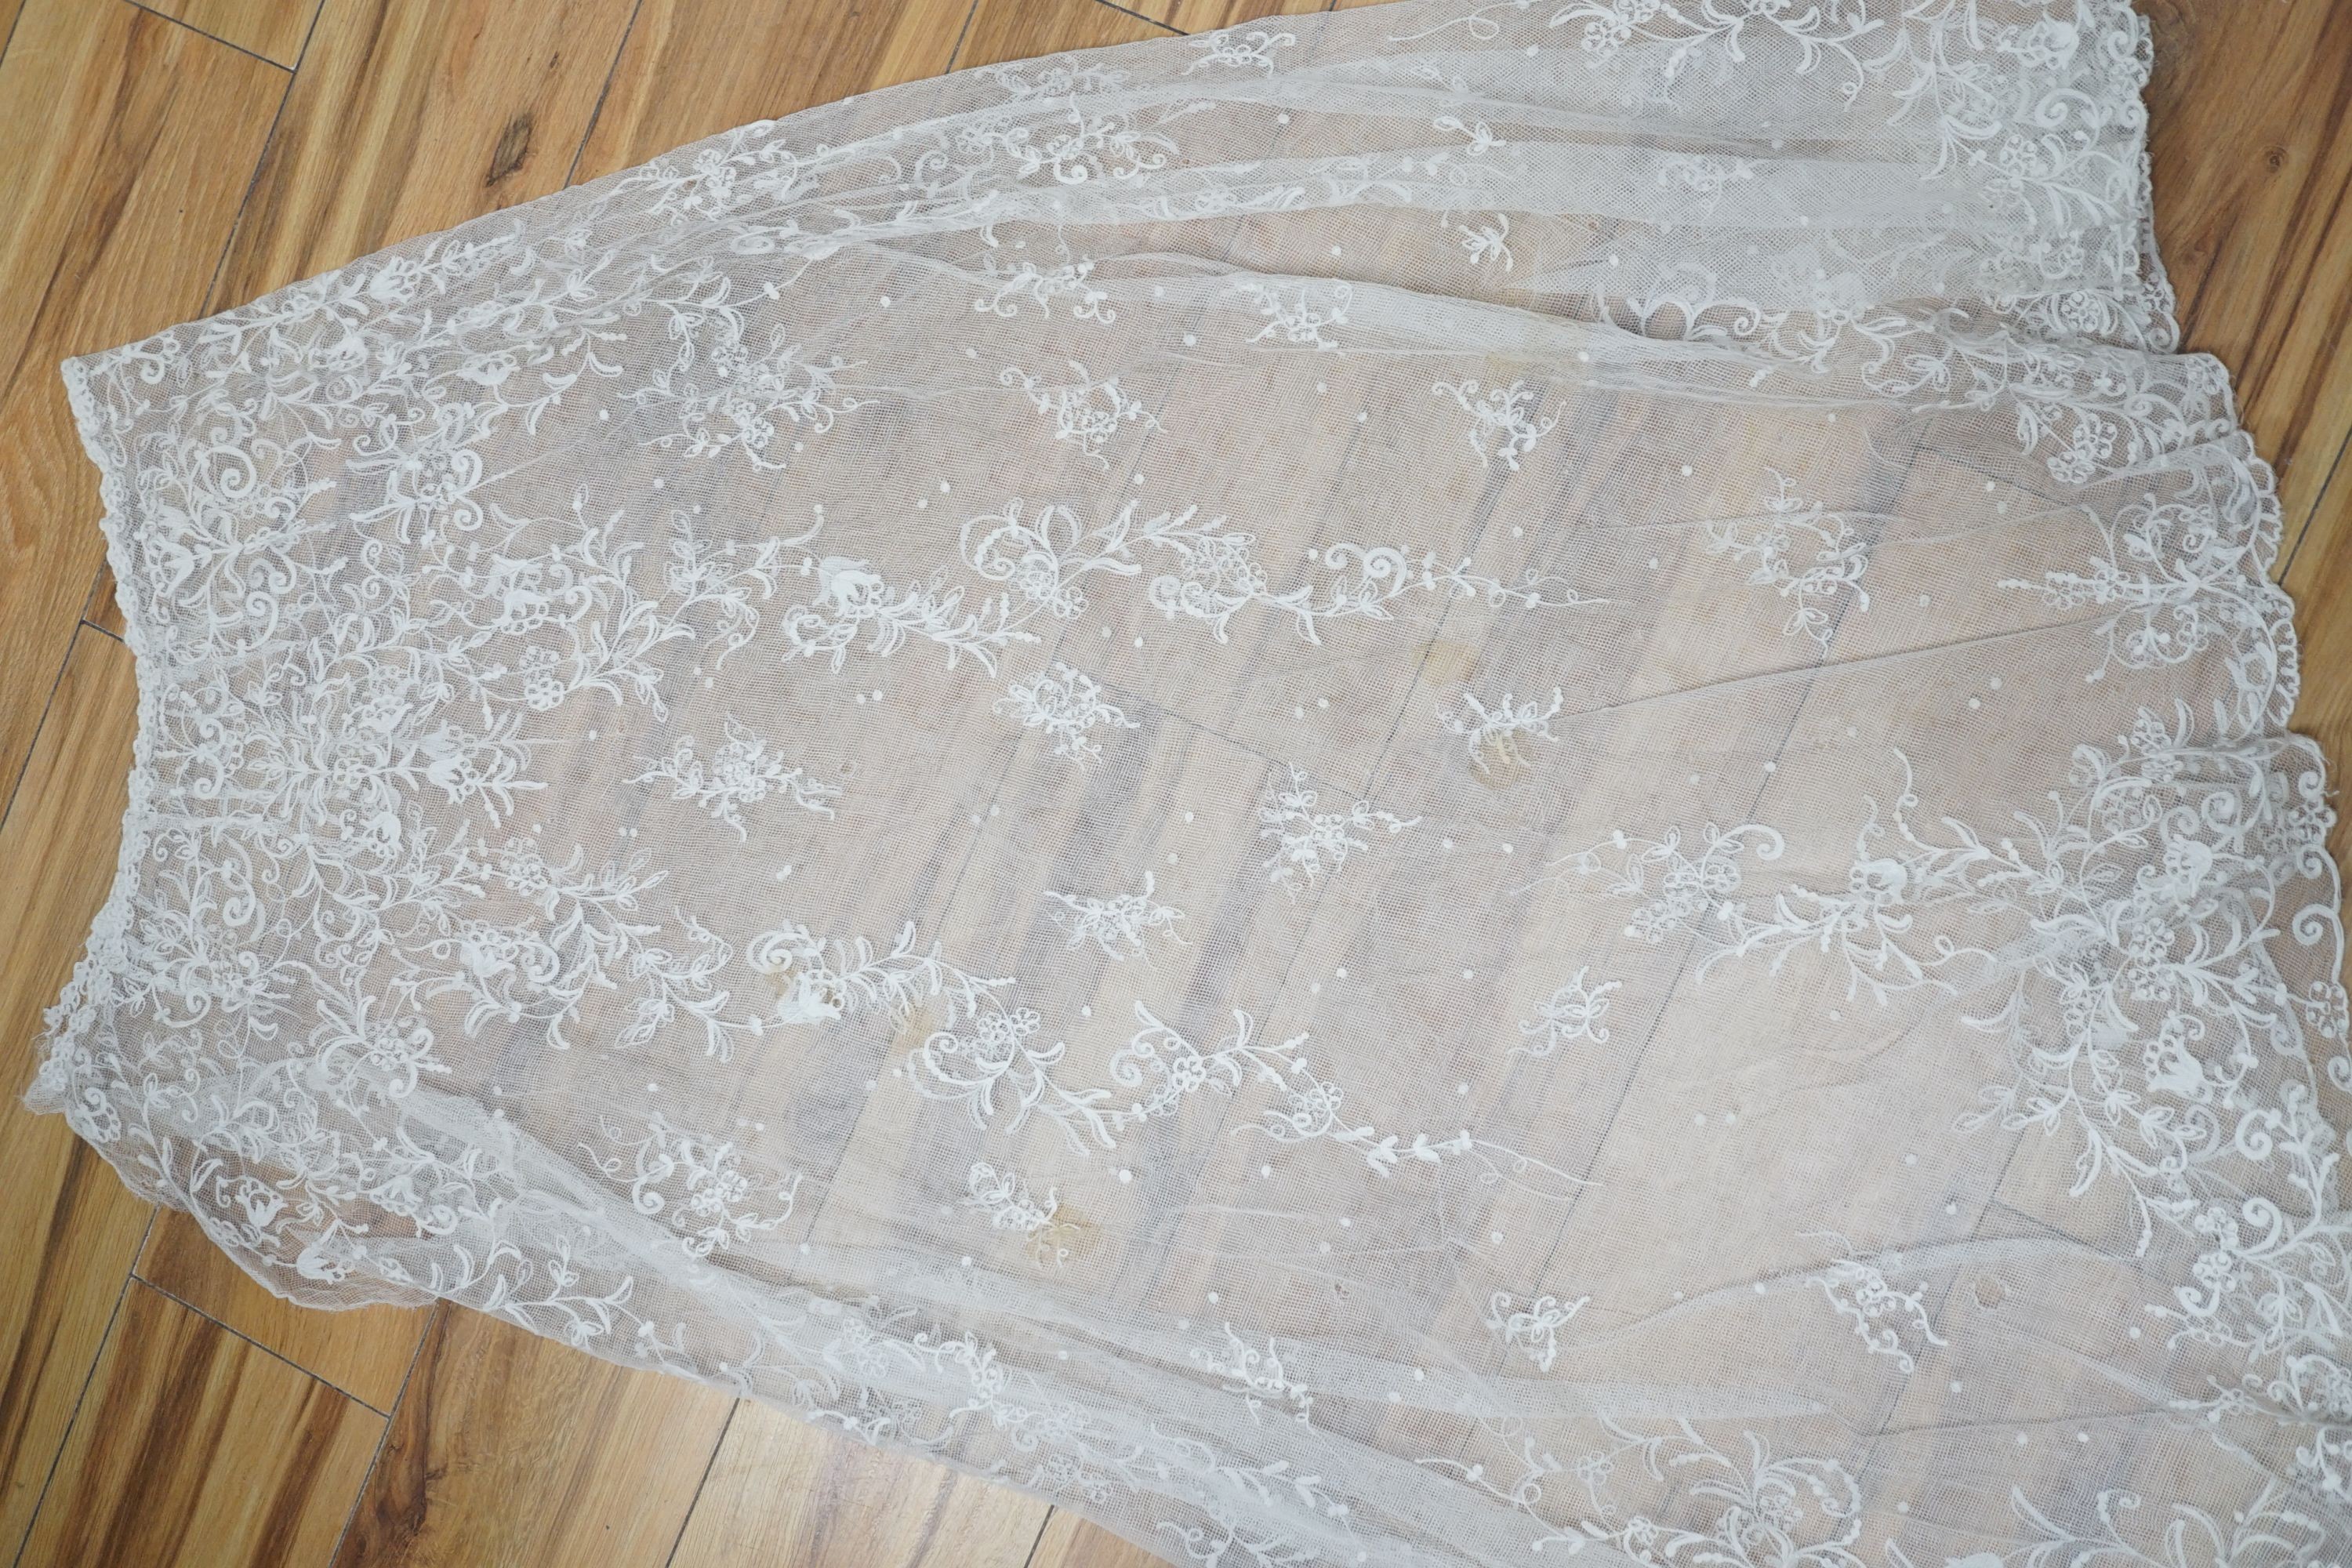 A needle lace skirt panel, a similar stole, various machine laces and trimmings